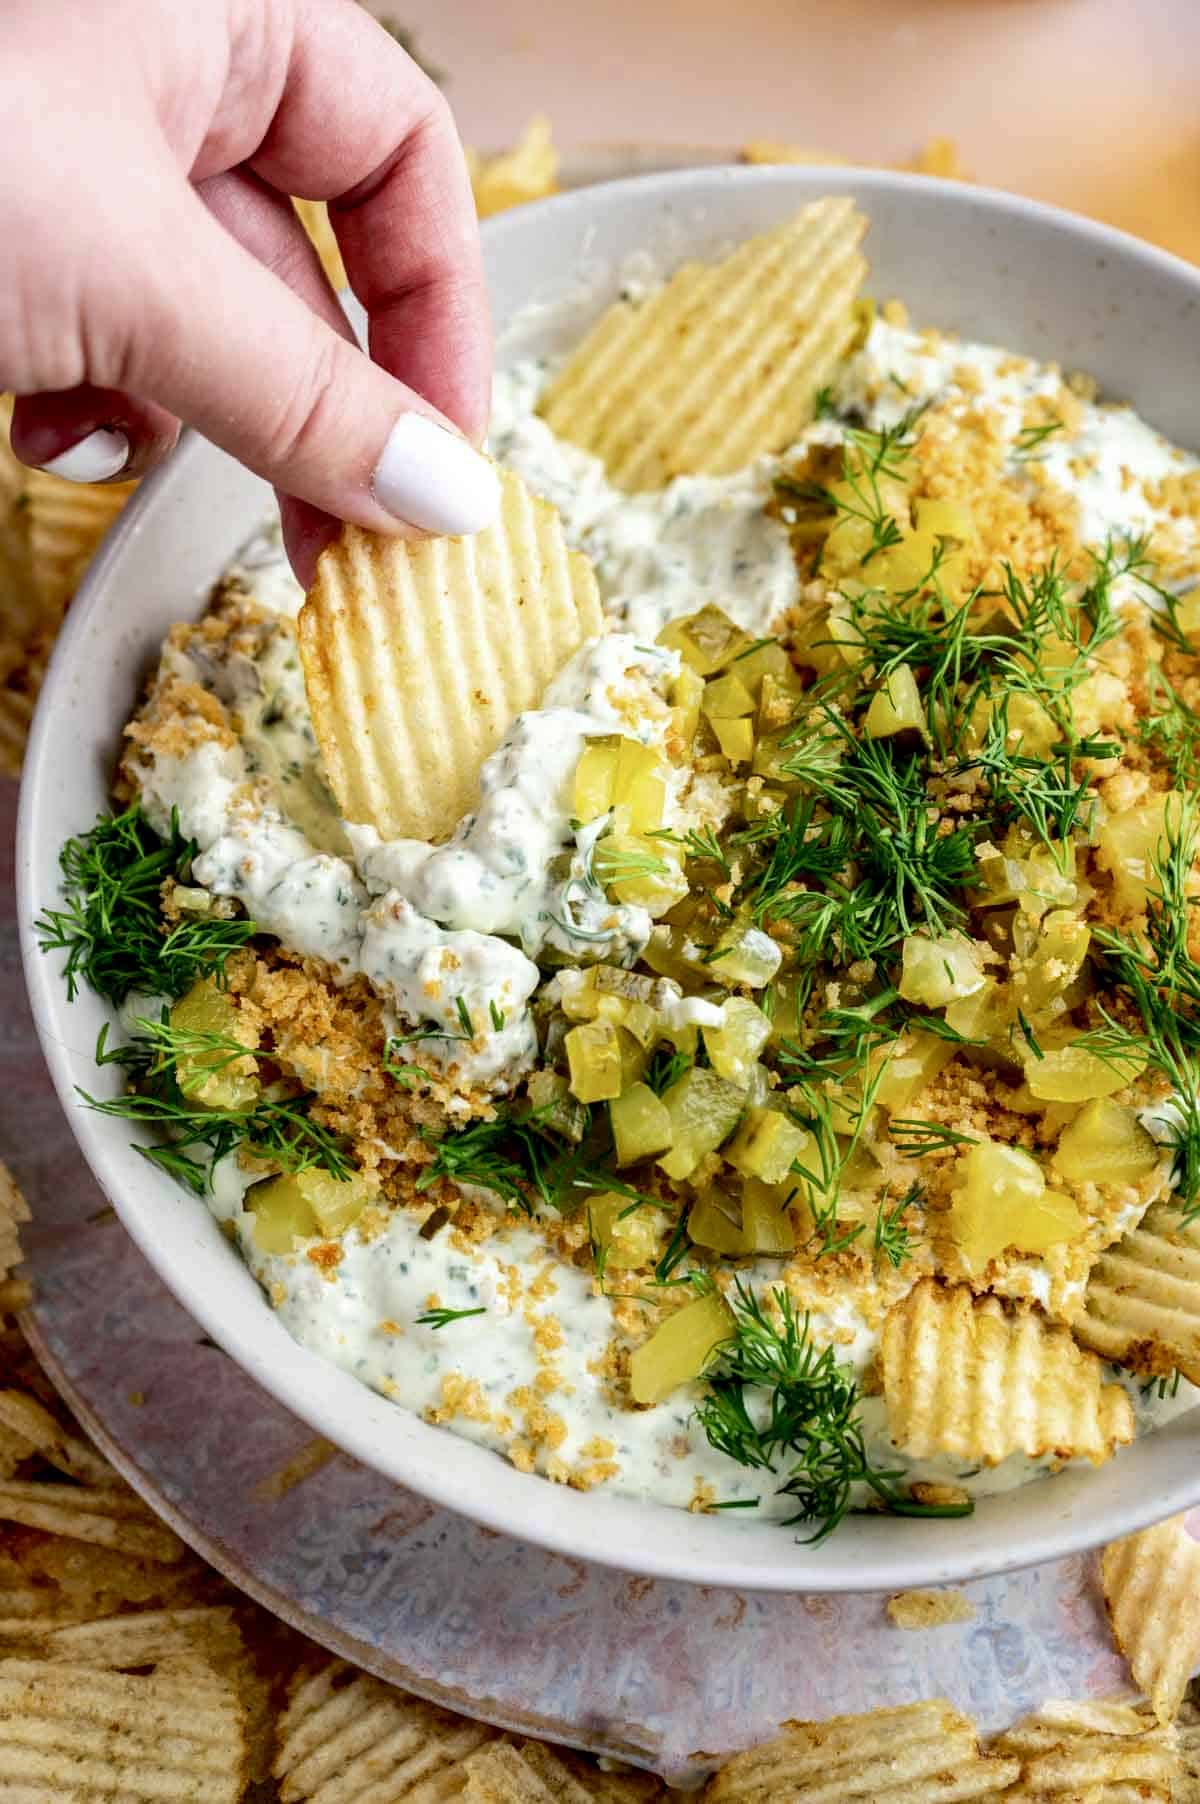 A bowl full of dip topped with bread crumbs, chopped, pickles, and dill with a hand scooping some dip with a chip.